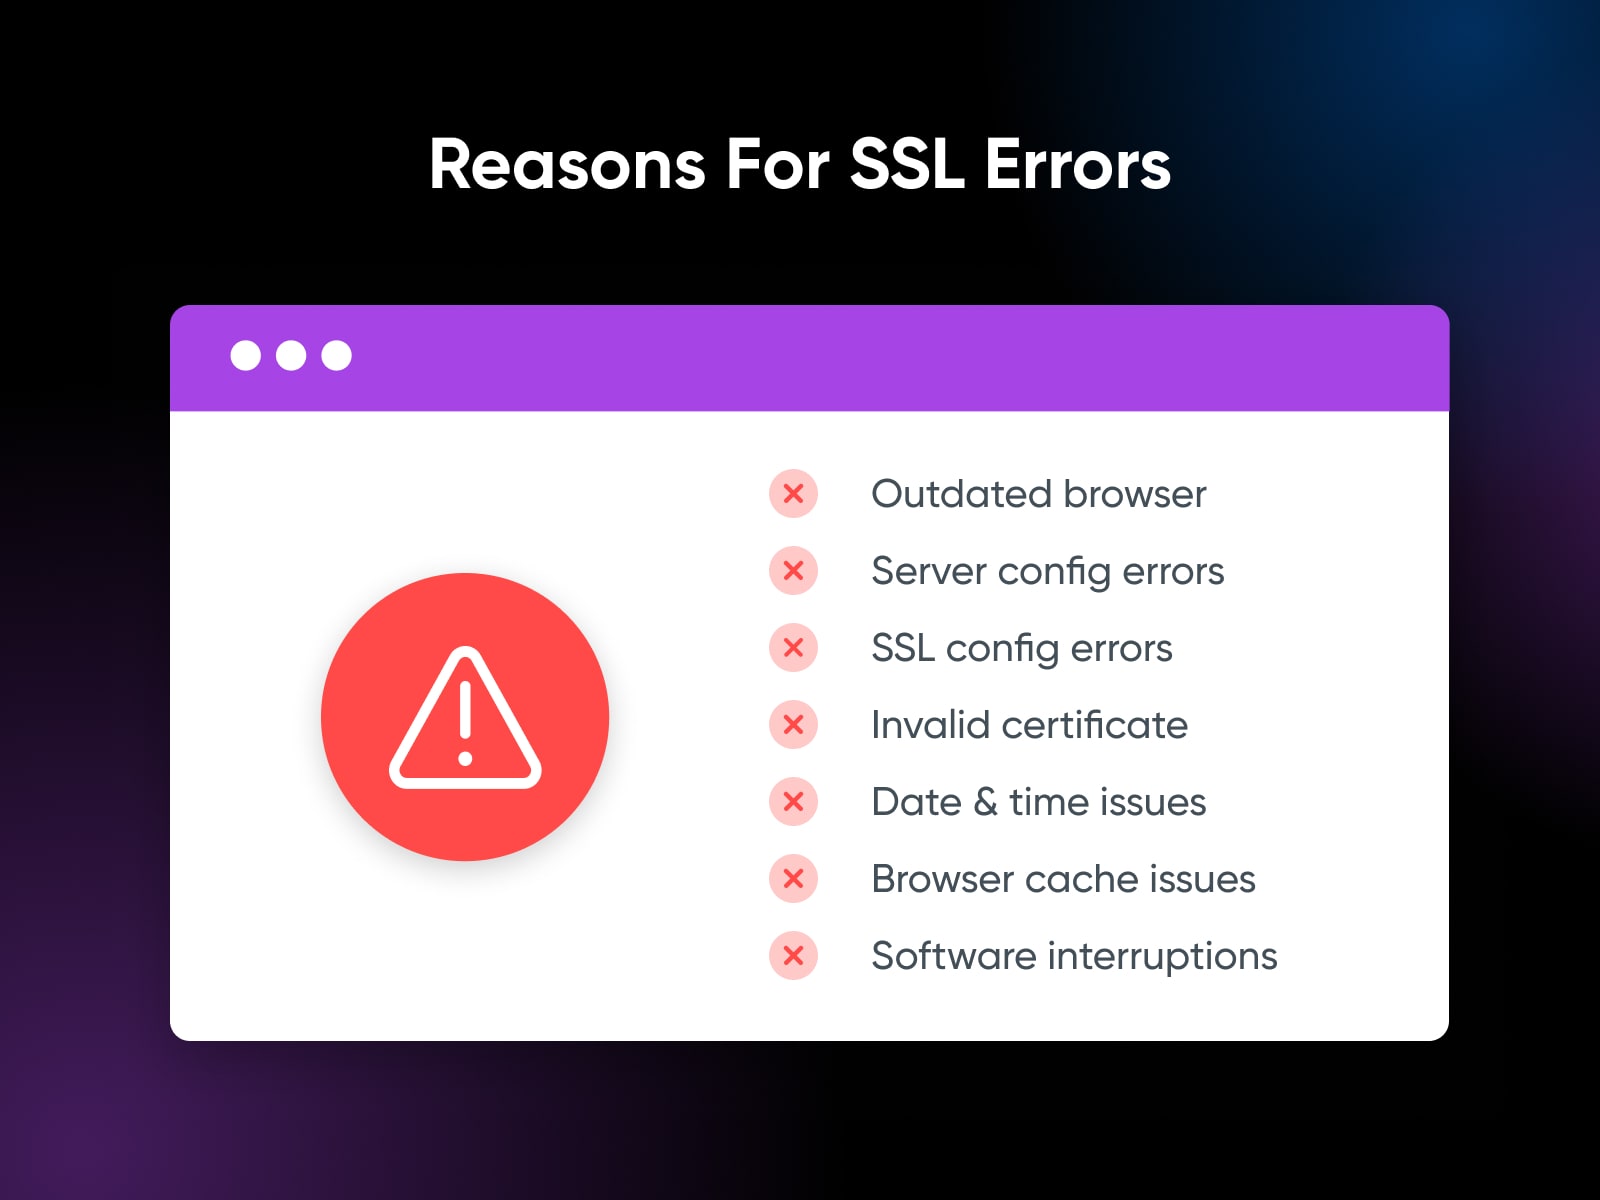 reasons for SSL errors include outdated browser, server config errors, SSL config errors, invalid certiciate, date & time issues, browser cache issues, and software interruptions